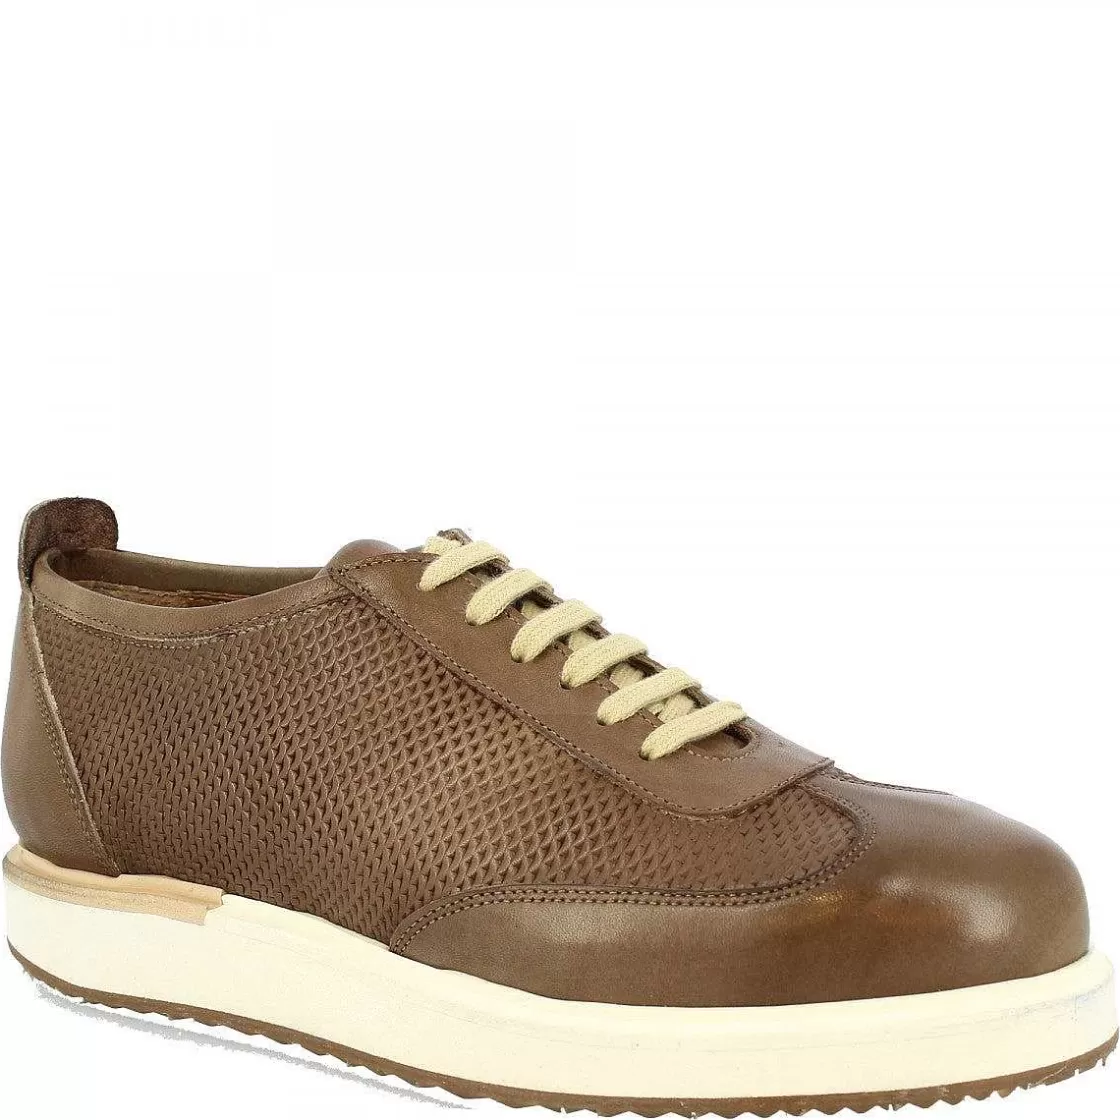 Leonardo Men'S Handmade Casual Lace-Up Shoes In Taupe Leather Sale